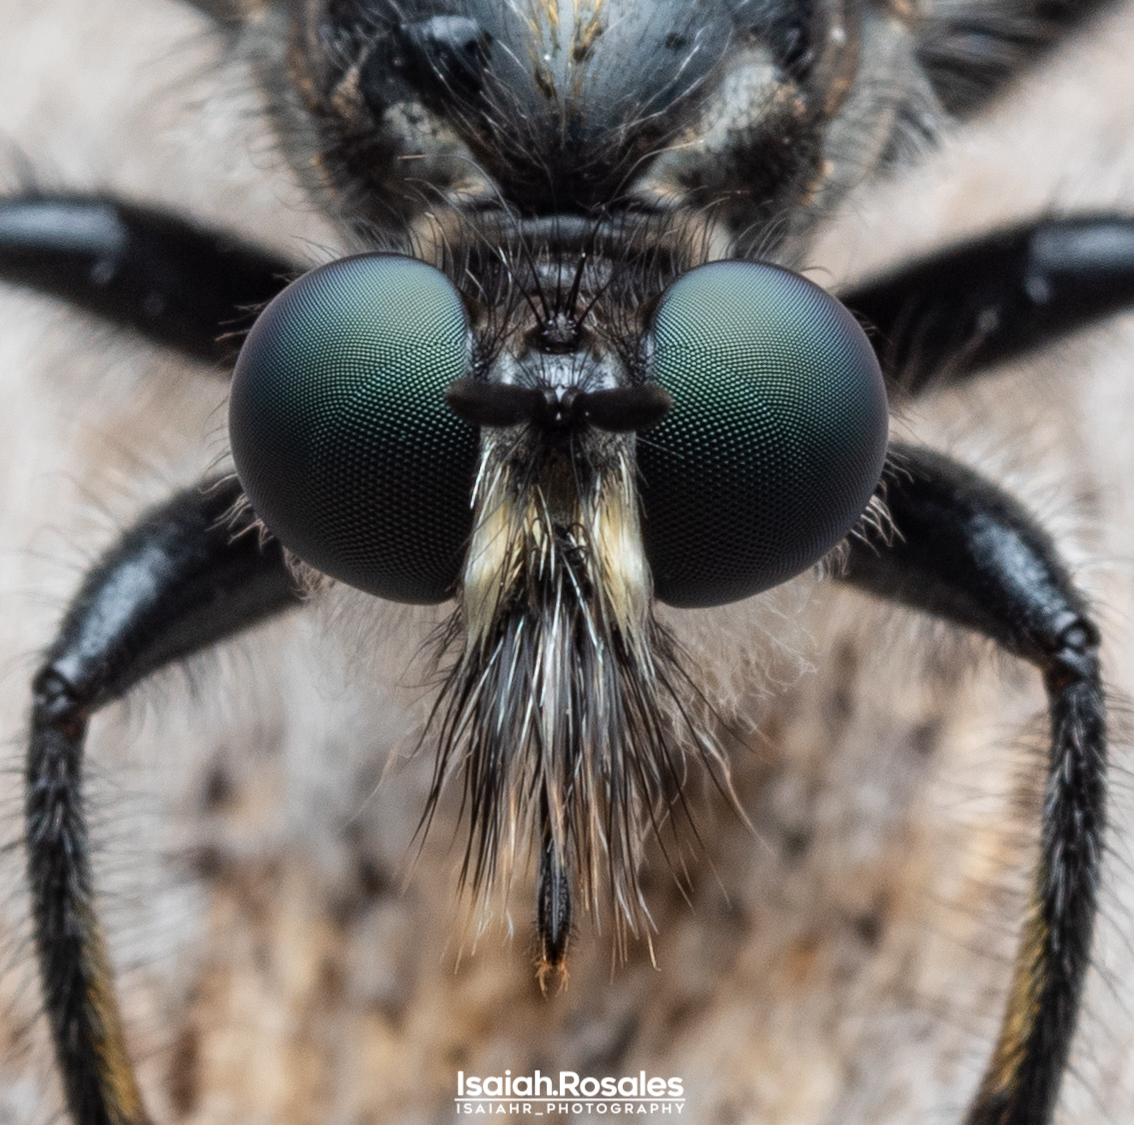 Could you imagine this face being the last thing you saw just before you died?😬-- #Robberflies, their no joke! (#Asilidae sp.)
--
Heard today was #WorldRobberflyDay ! These guys have all my respect. ;-)  
#summer #nature #macrophotography #wildlife #beautiful #macro #invert